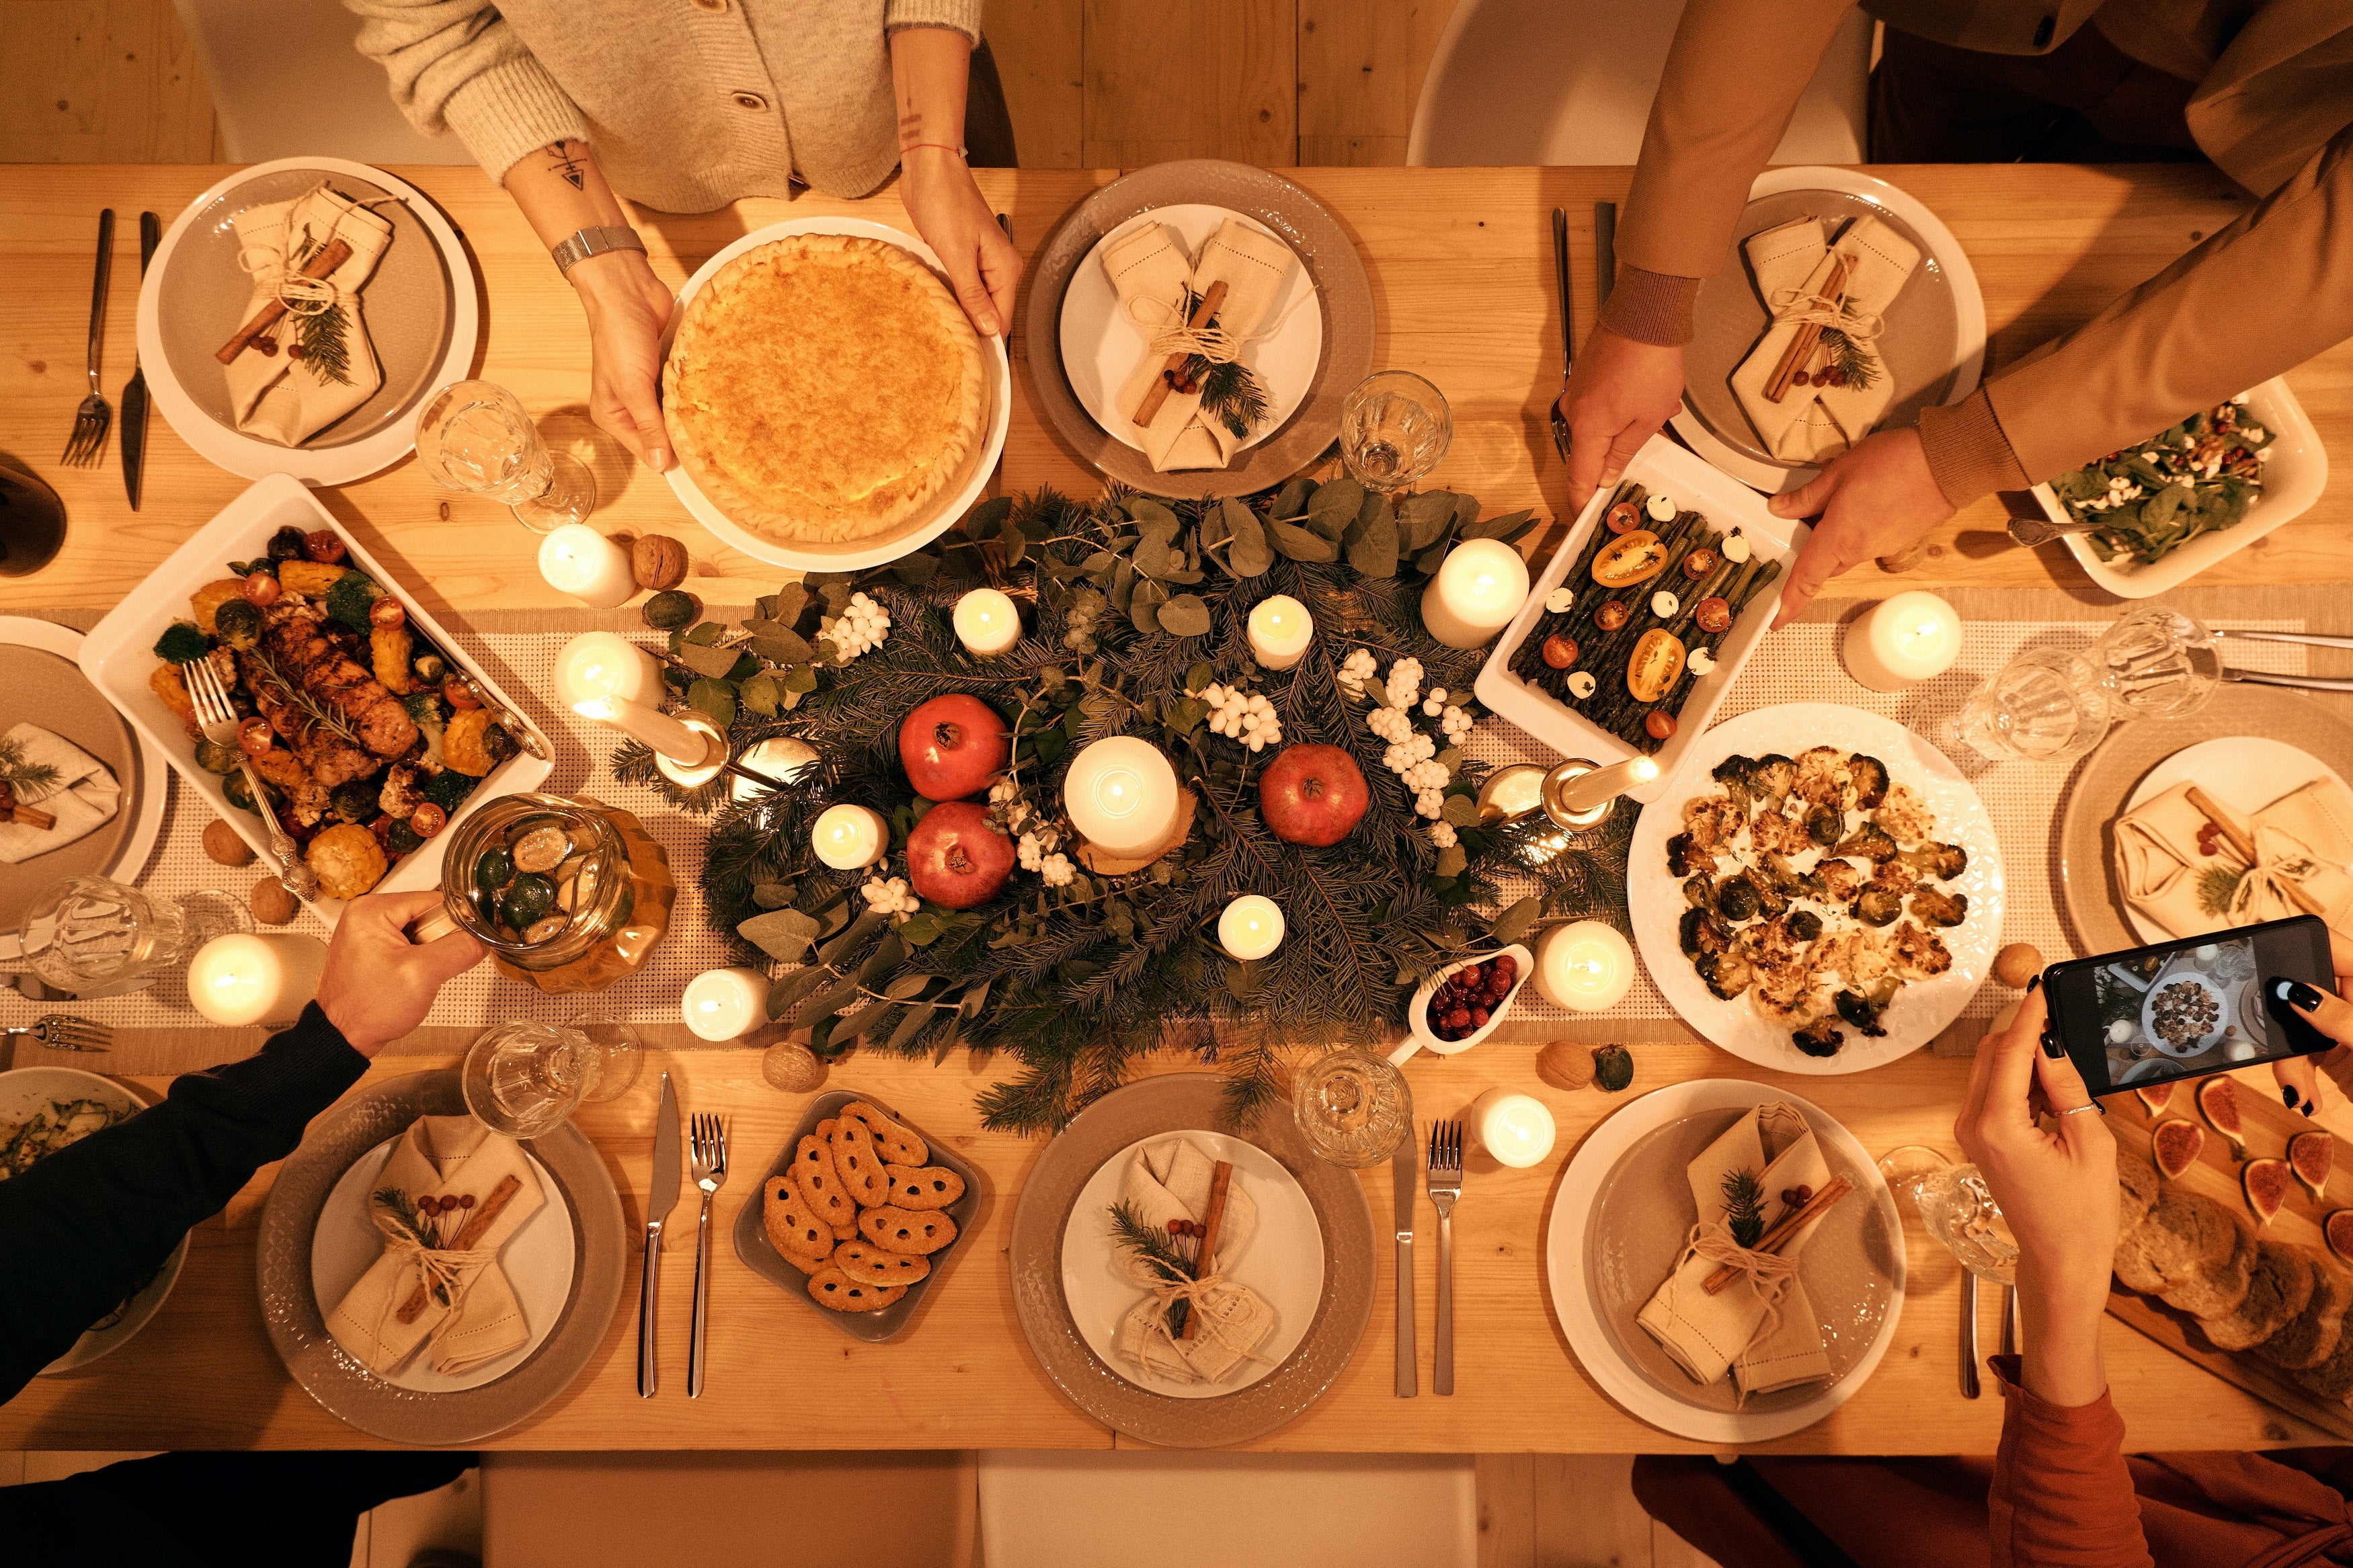 Overhead shot of Christmas dinner table decorated and with food.